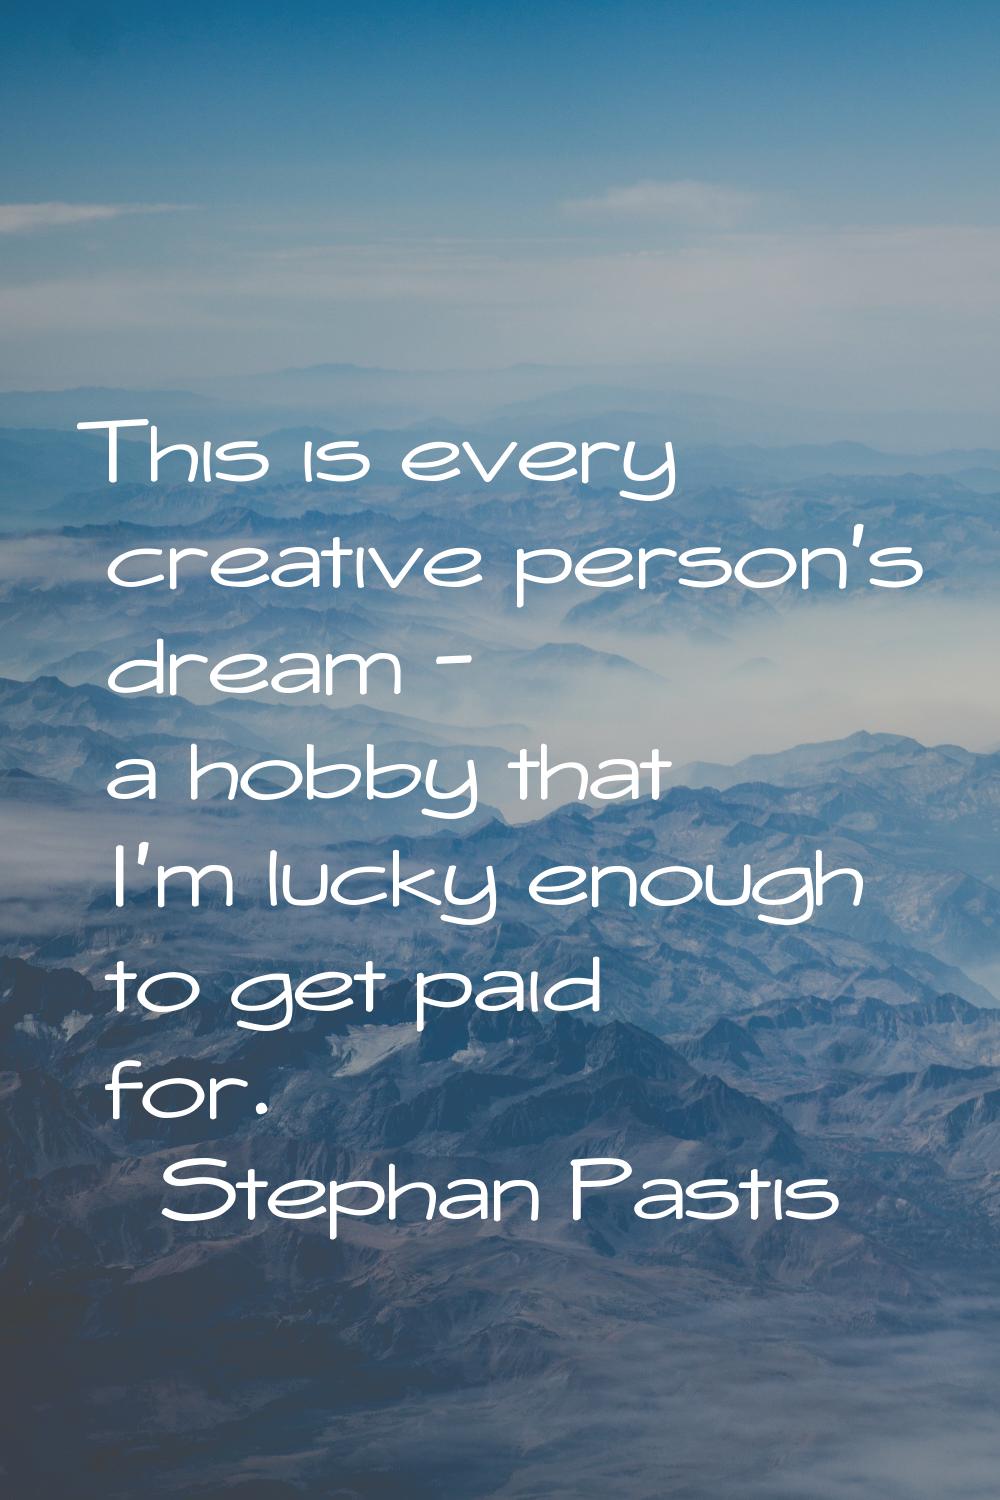 This is every creative person's dream - a hobby that I'm lucky enough to get paid for.